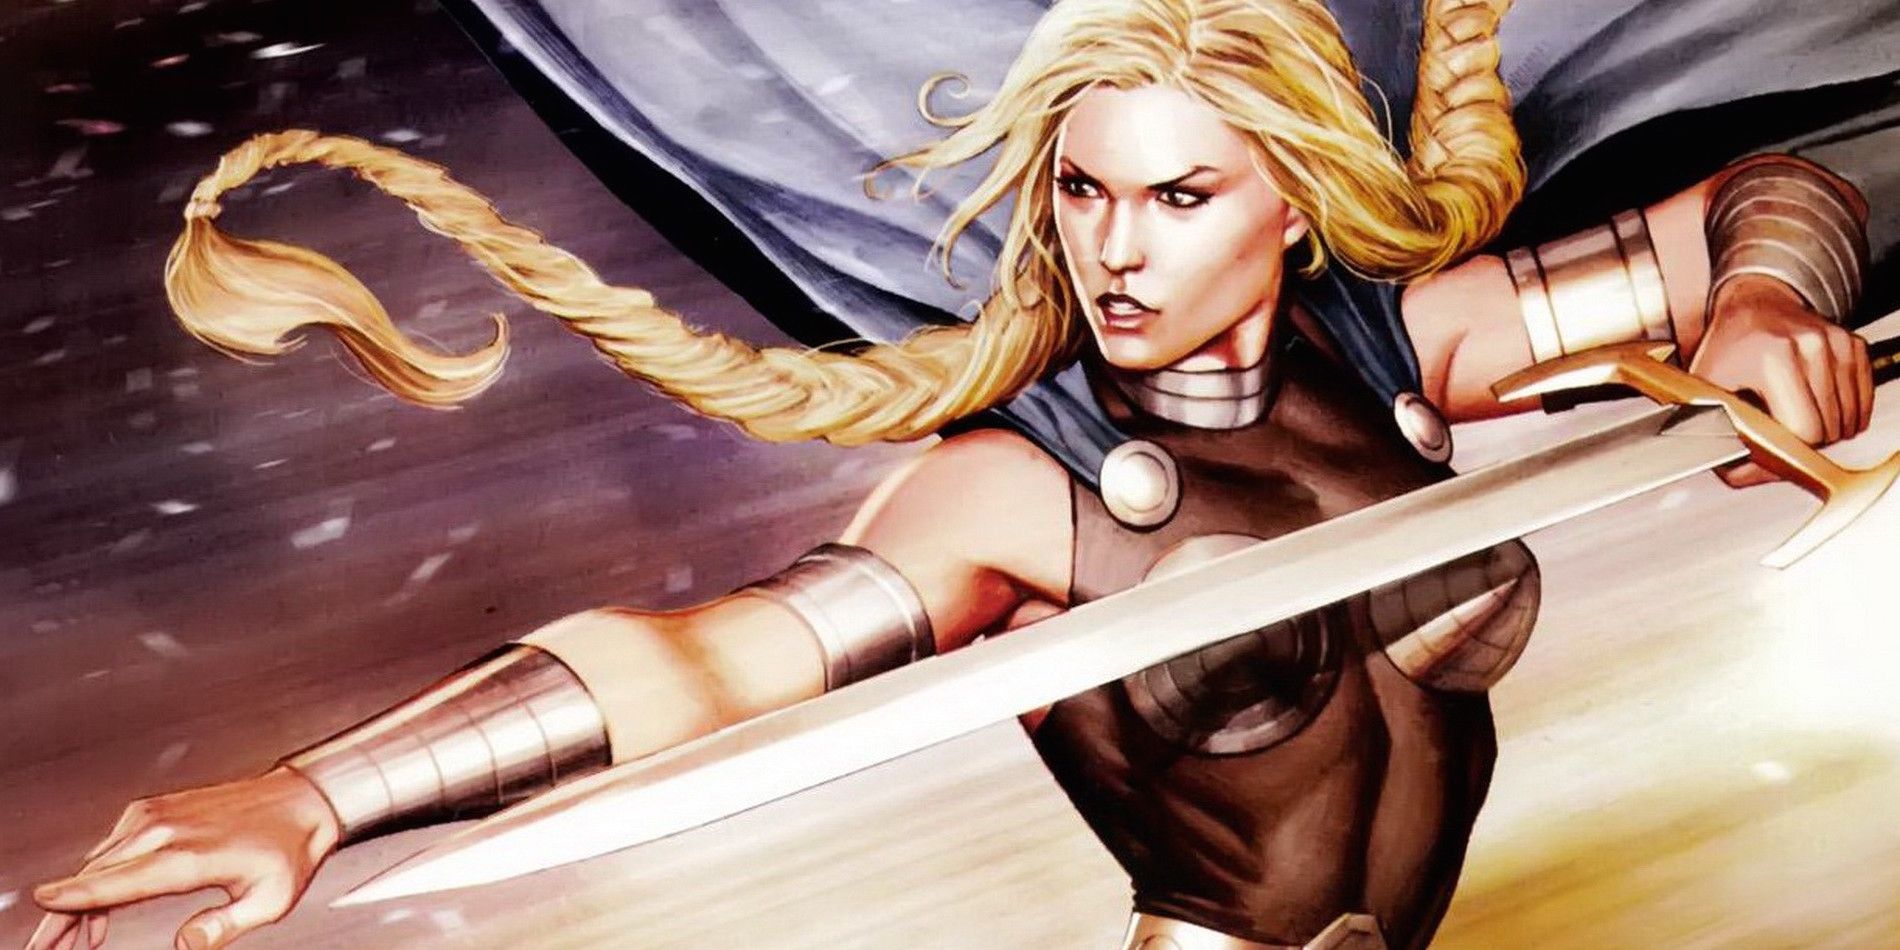 Valkyrie - Avengers Who We'd Like to See in Their Own Movie